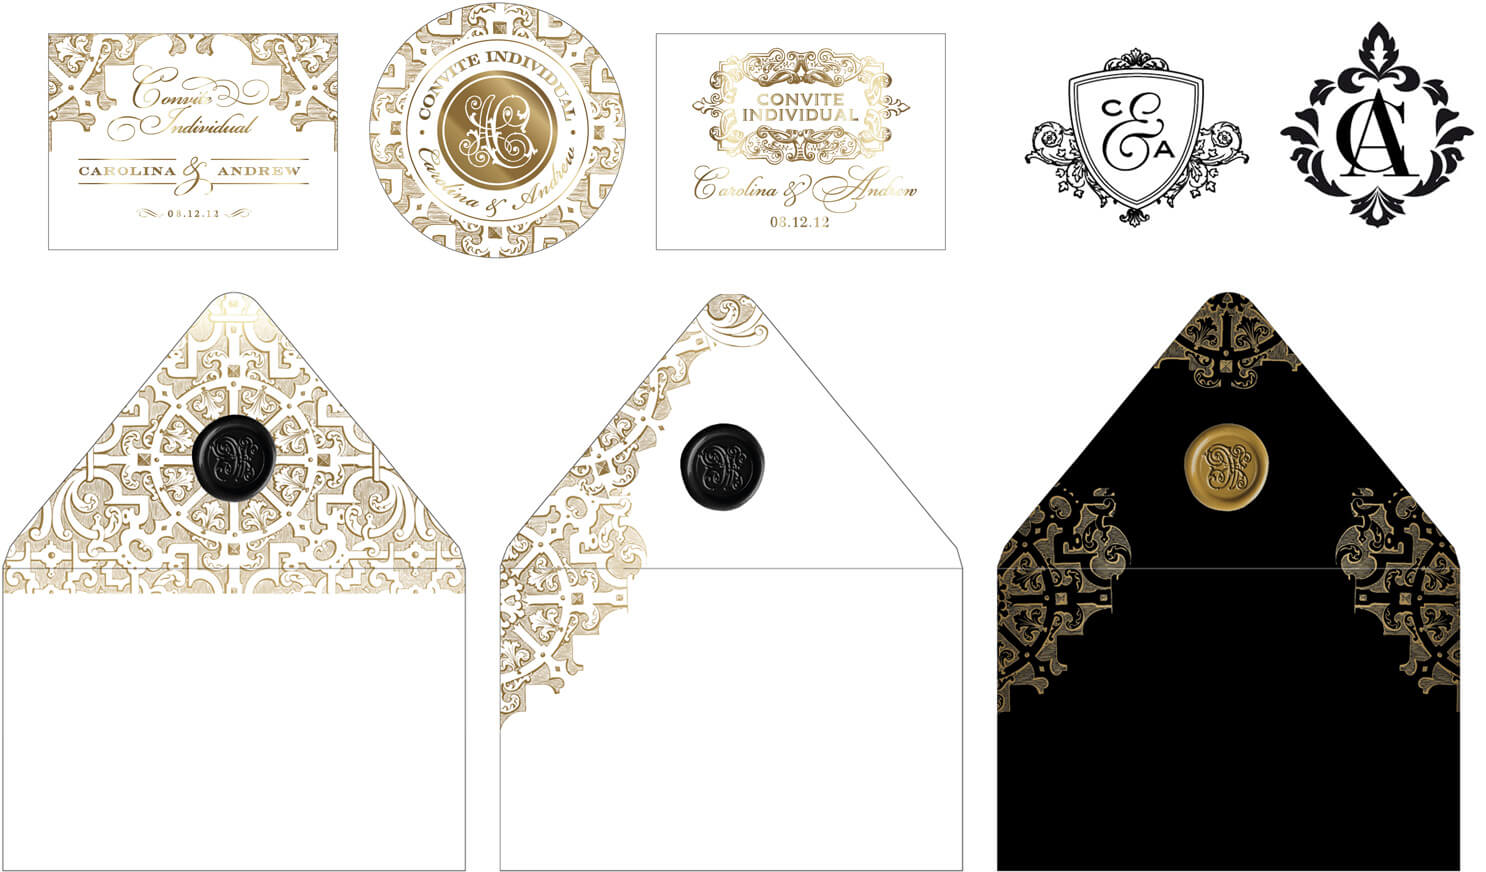 Castle Itaipava inspired envelopes and entrance cards